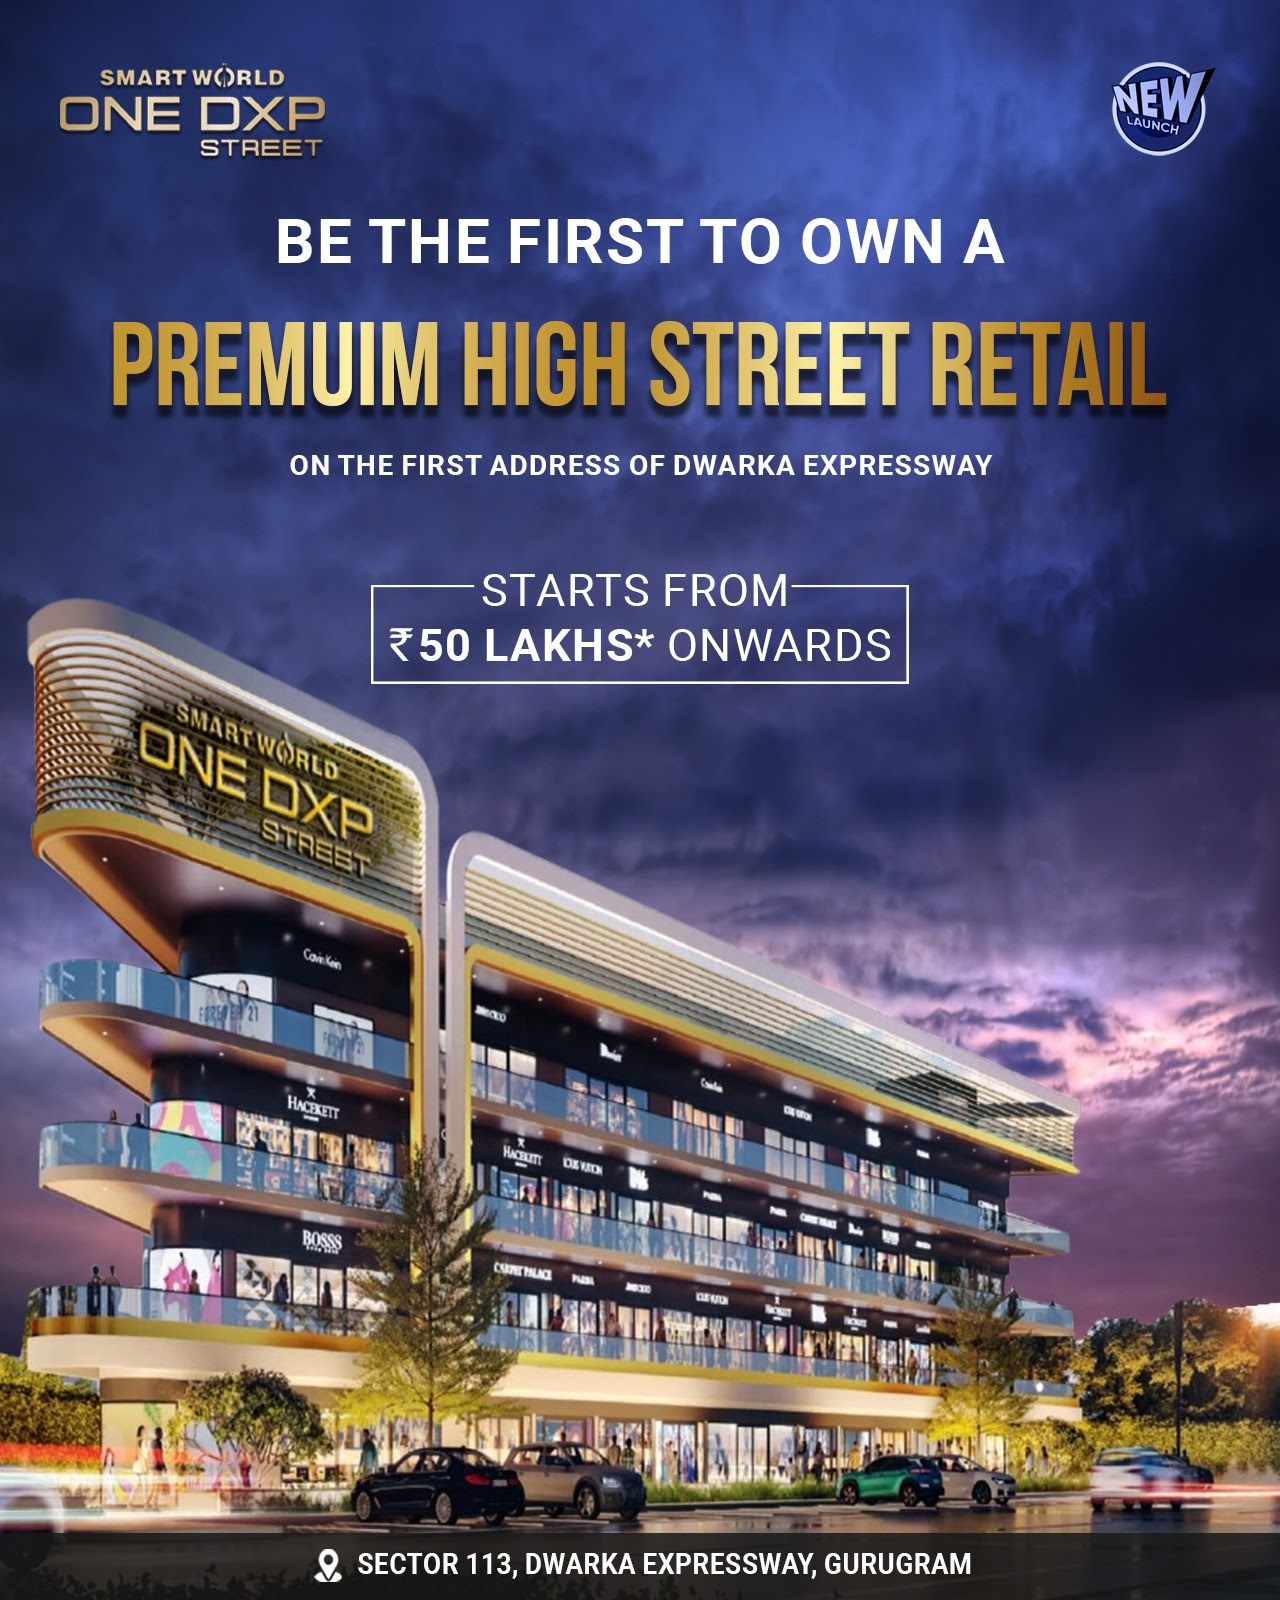 Premium hoigh street retail Rs 50 Lac onwards at Smart World One Dxp Street in Sector 113, Gurgaon Update